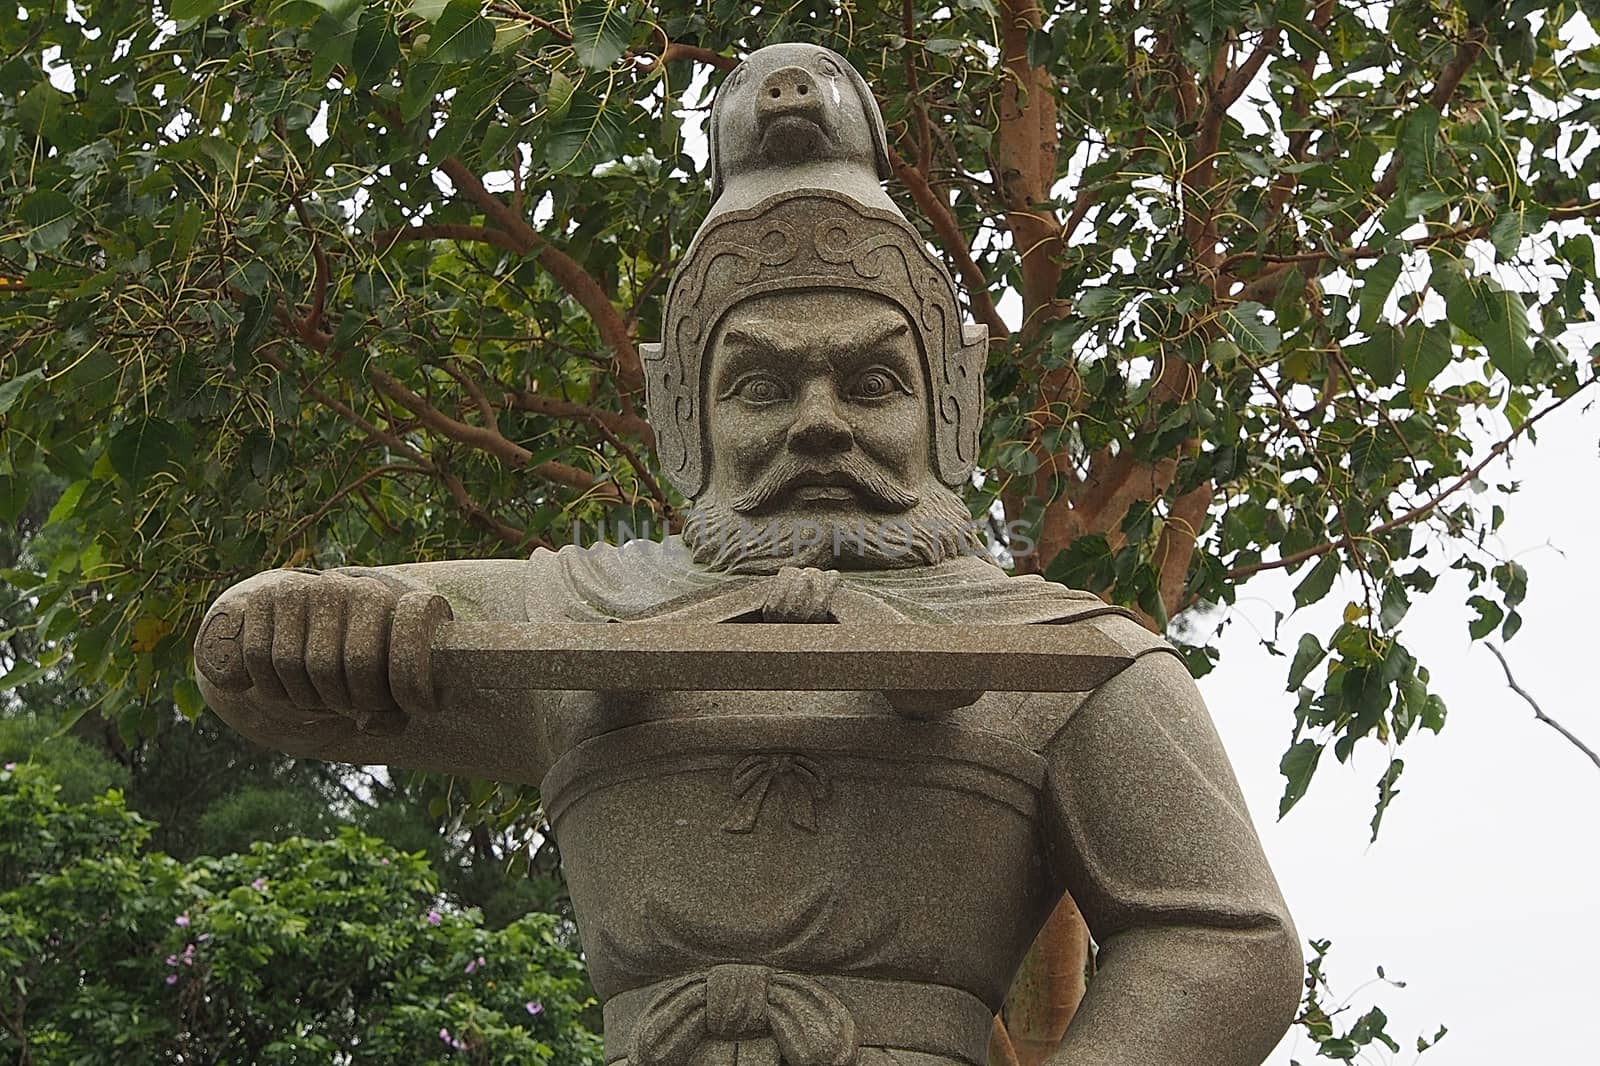 Statue warrior holding a sword.